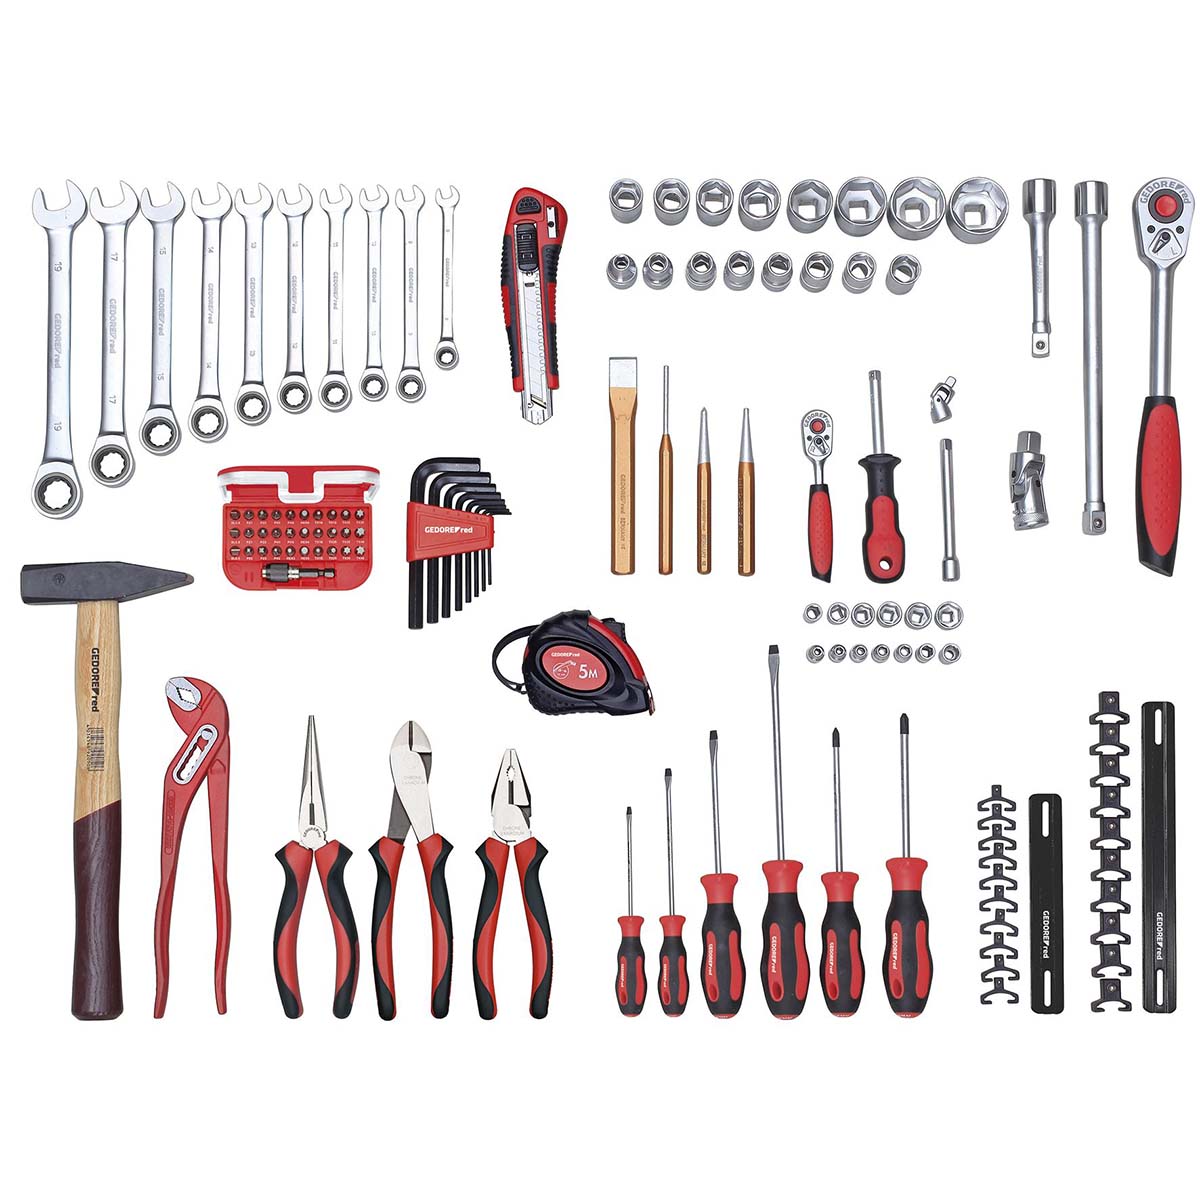 GEDORE red R21000108 - ALL-IN tool set, 108 pieces, without box (3301642)